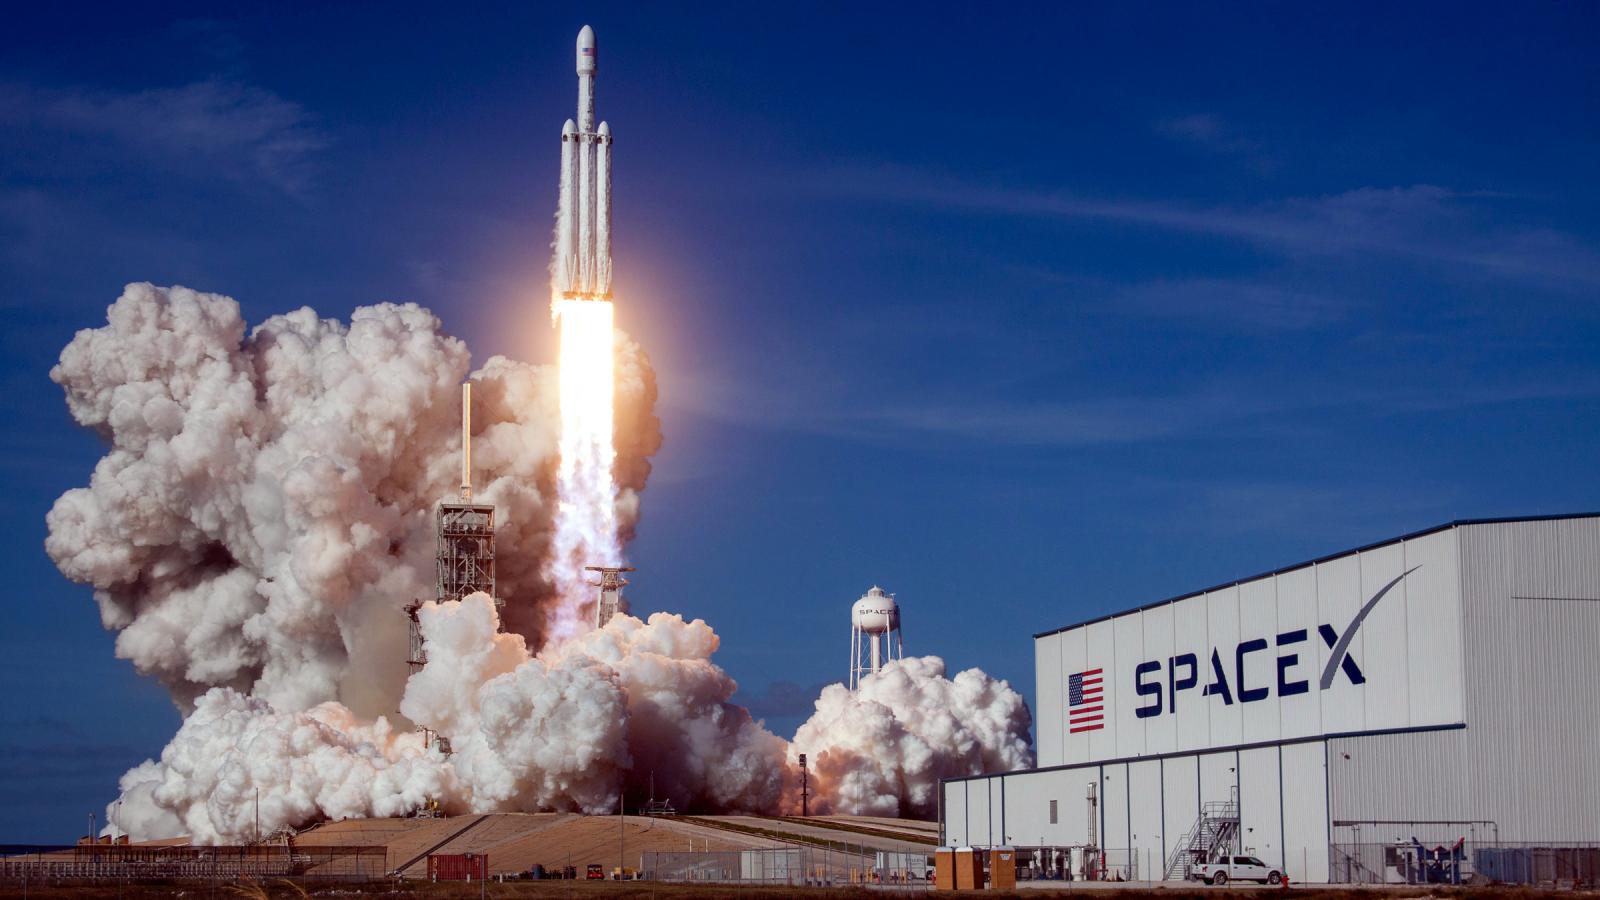 SpaceX To Launch Americans Into Space For The First Time Since The Space Shuttle Retired in 2011